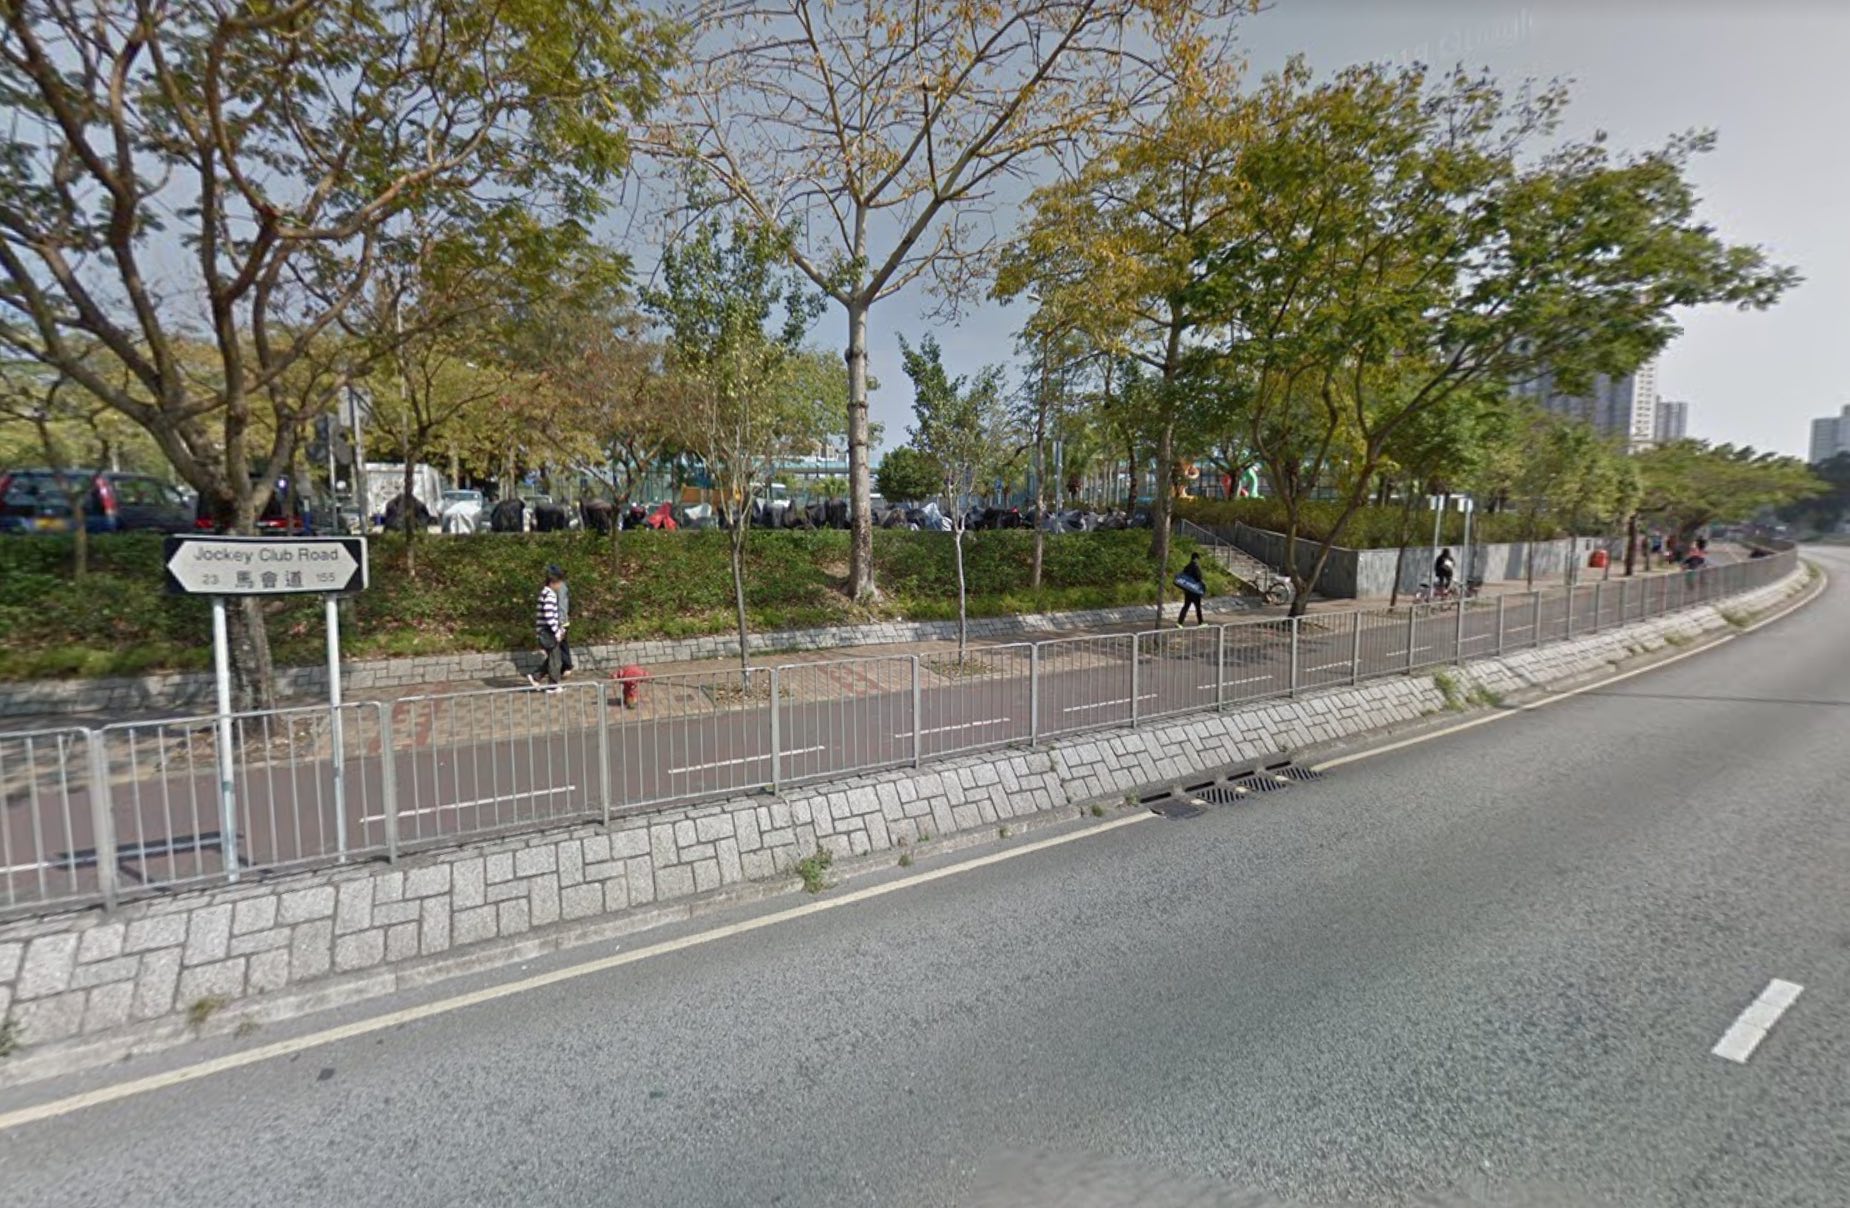 The stretch of Jockey Club Road in Sheung Shui where a man was knifed by three assailants following a car chase Monday night. Photo via Google Maps.